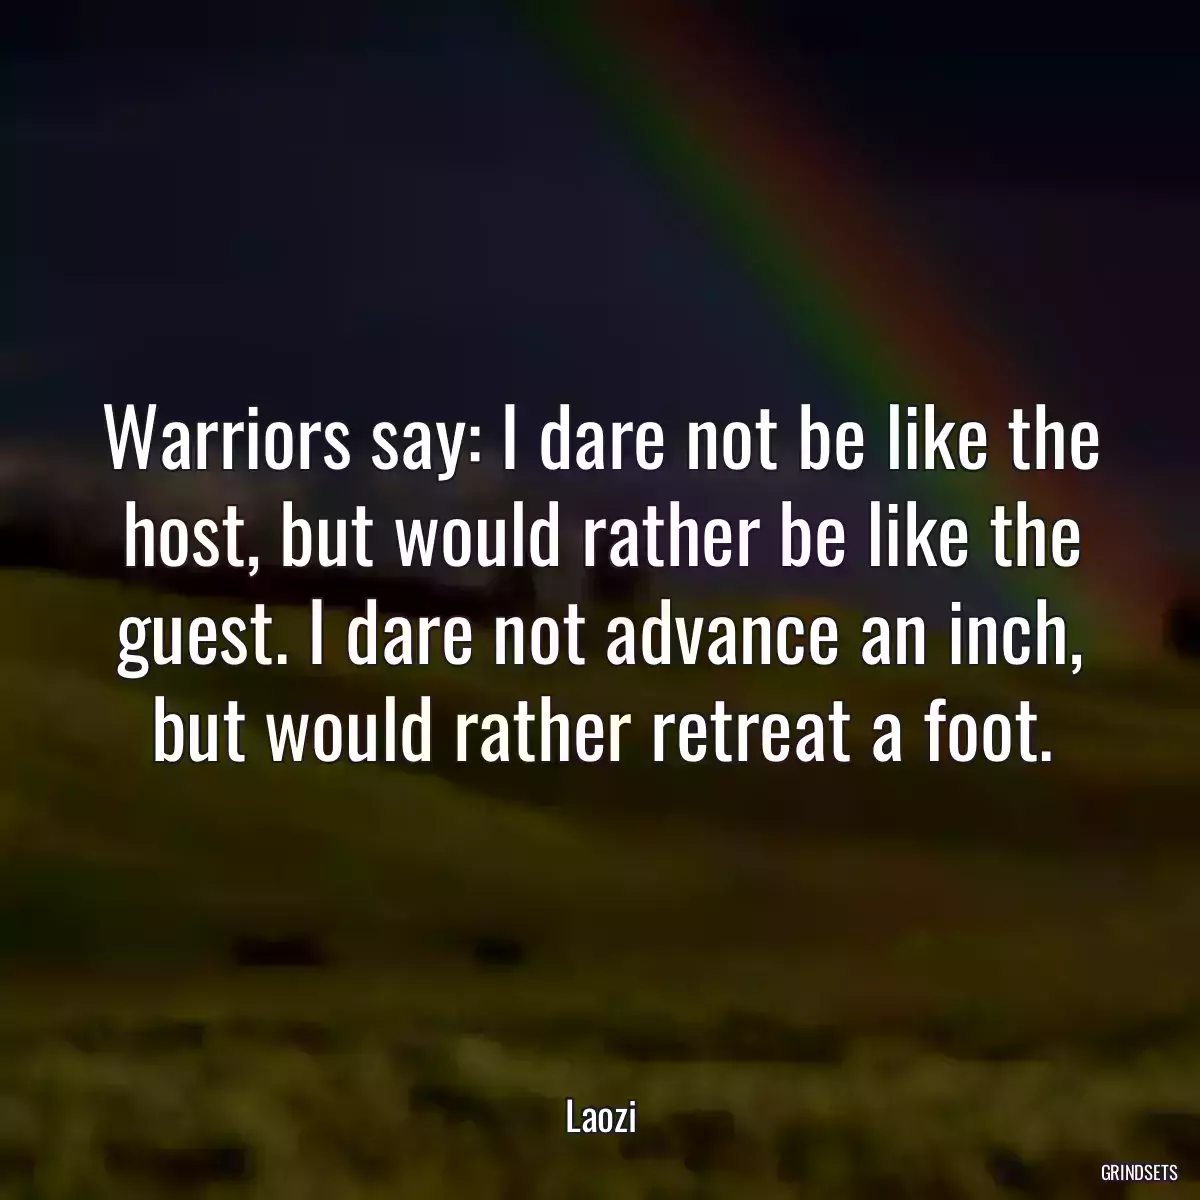 Warriors say: I dare not be like the host, but would rather be like the guest. I dare not advance an inch, but would rather retreat a foot.